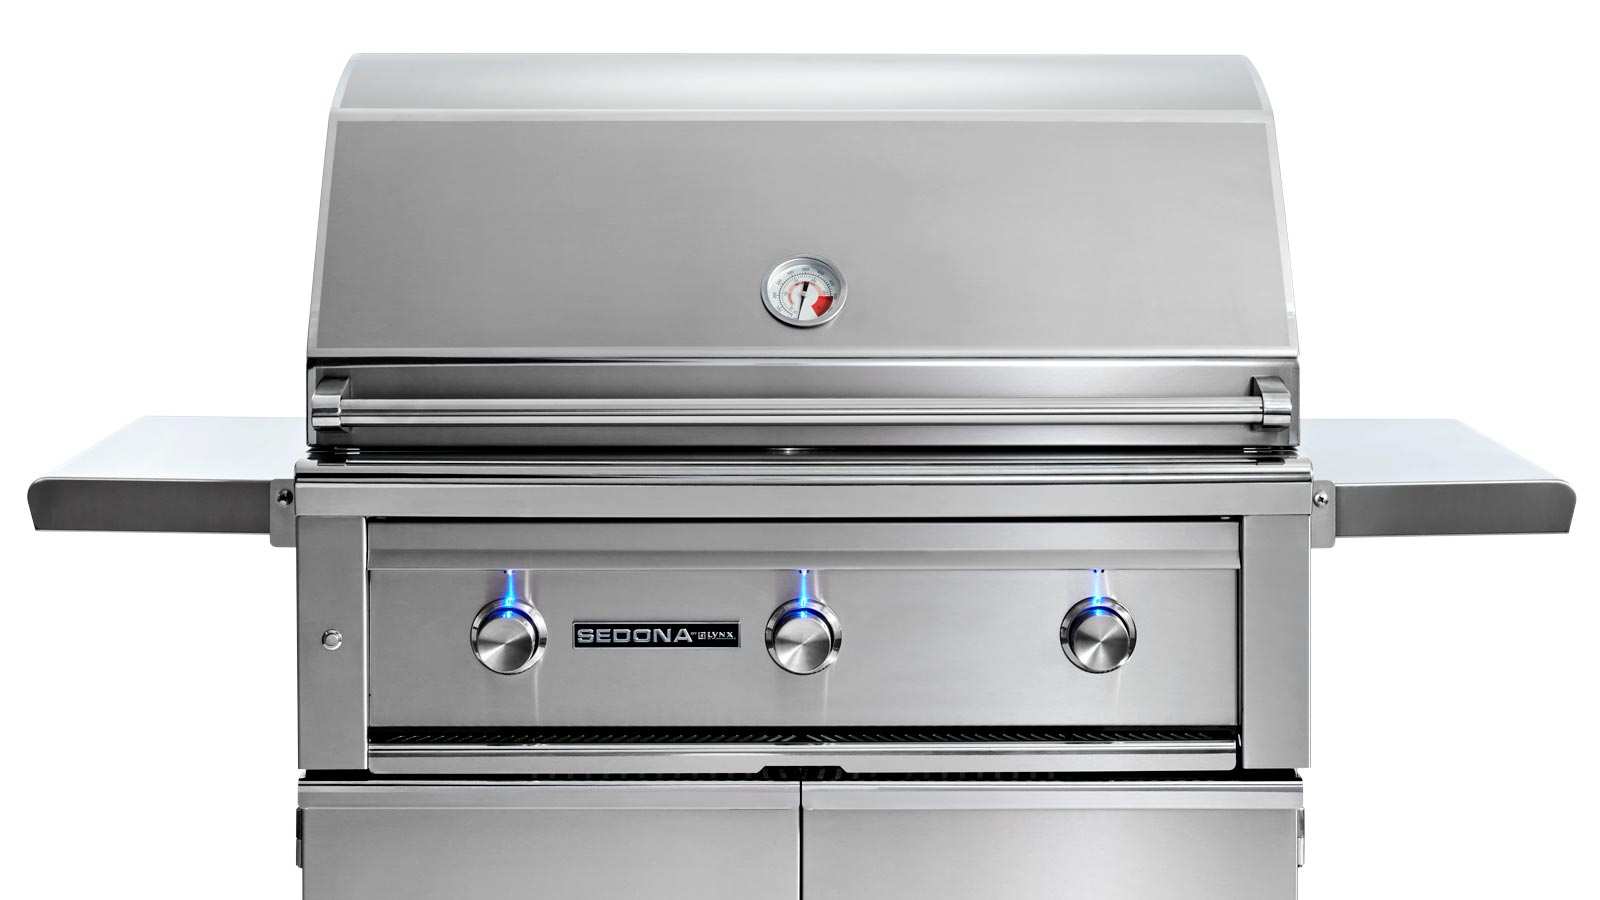 36" Freestanding Grill with 1 Prosear Infrared Burner and 2 Stainless Steel Burners (L600PSF)